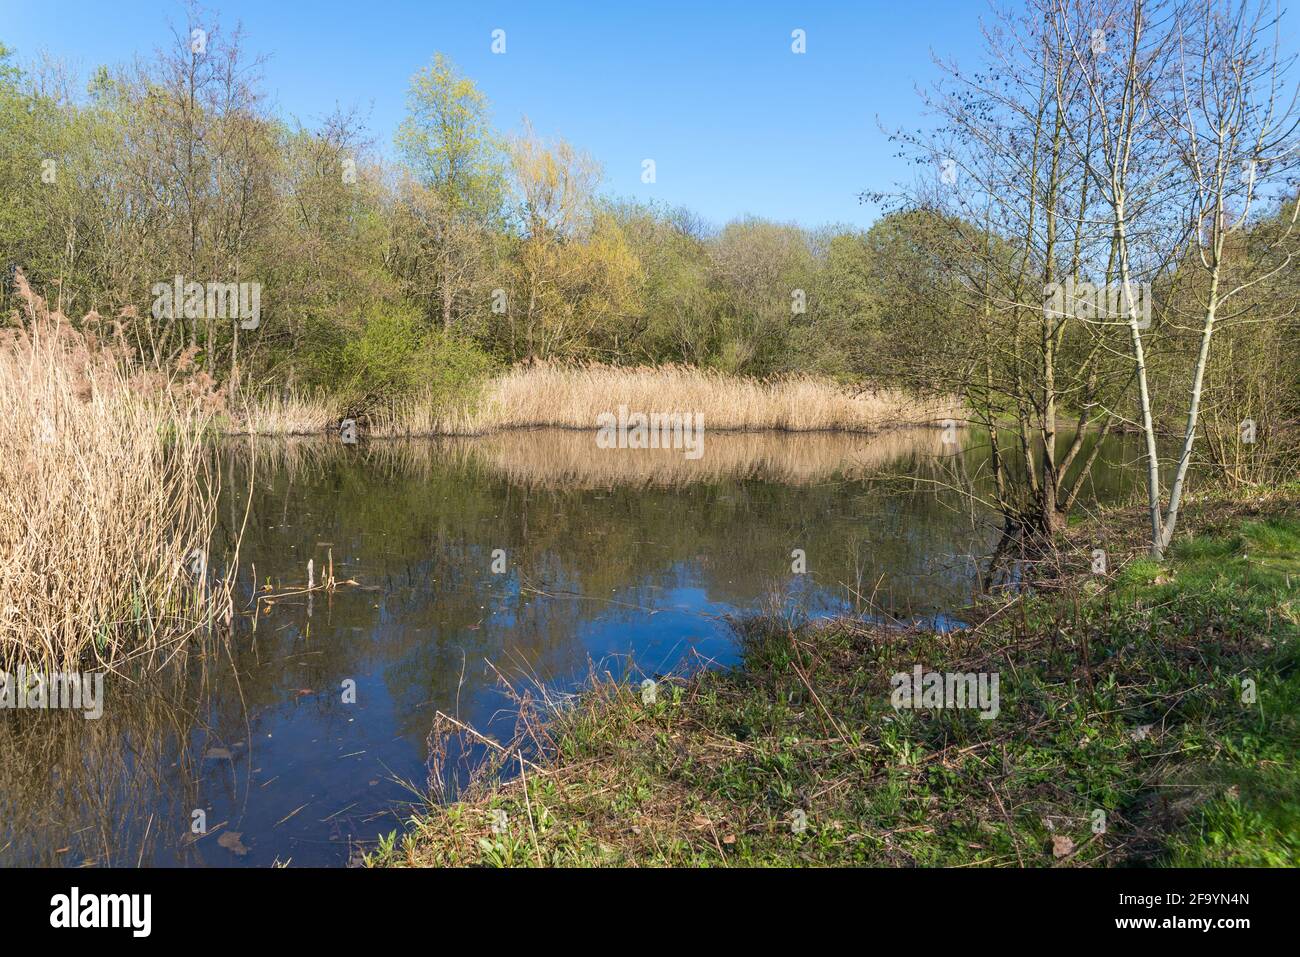 Sheepwash Local Nature Reserve in Sandwell, West Midlands, UK was created from reclaimed industrial wasteland in 1981,The River Tame runs through it. Stock Photo